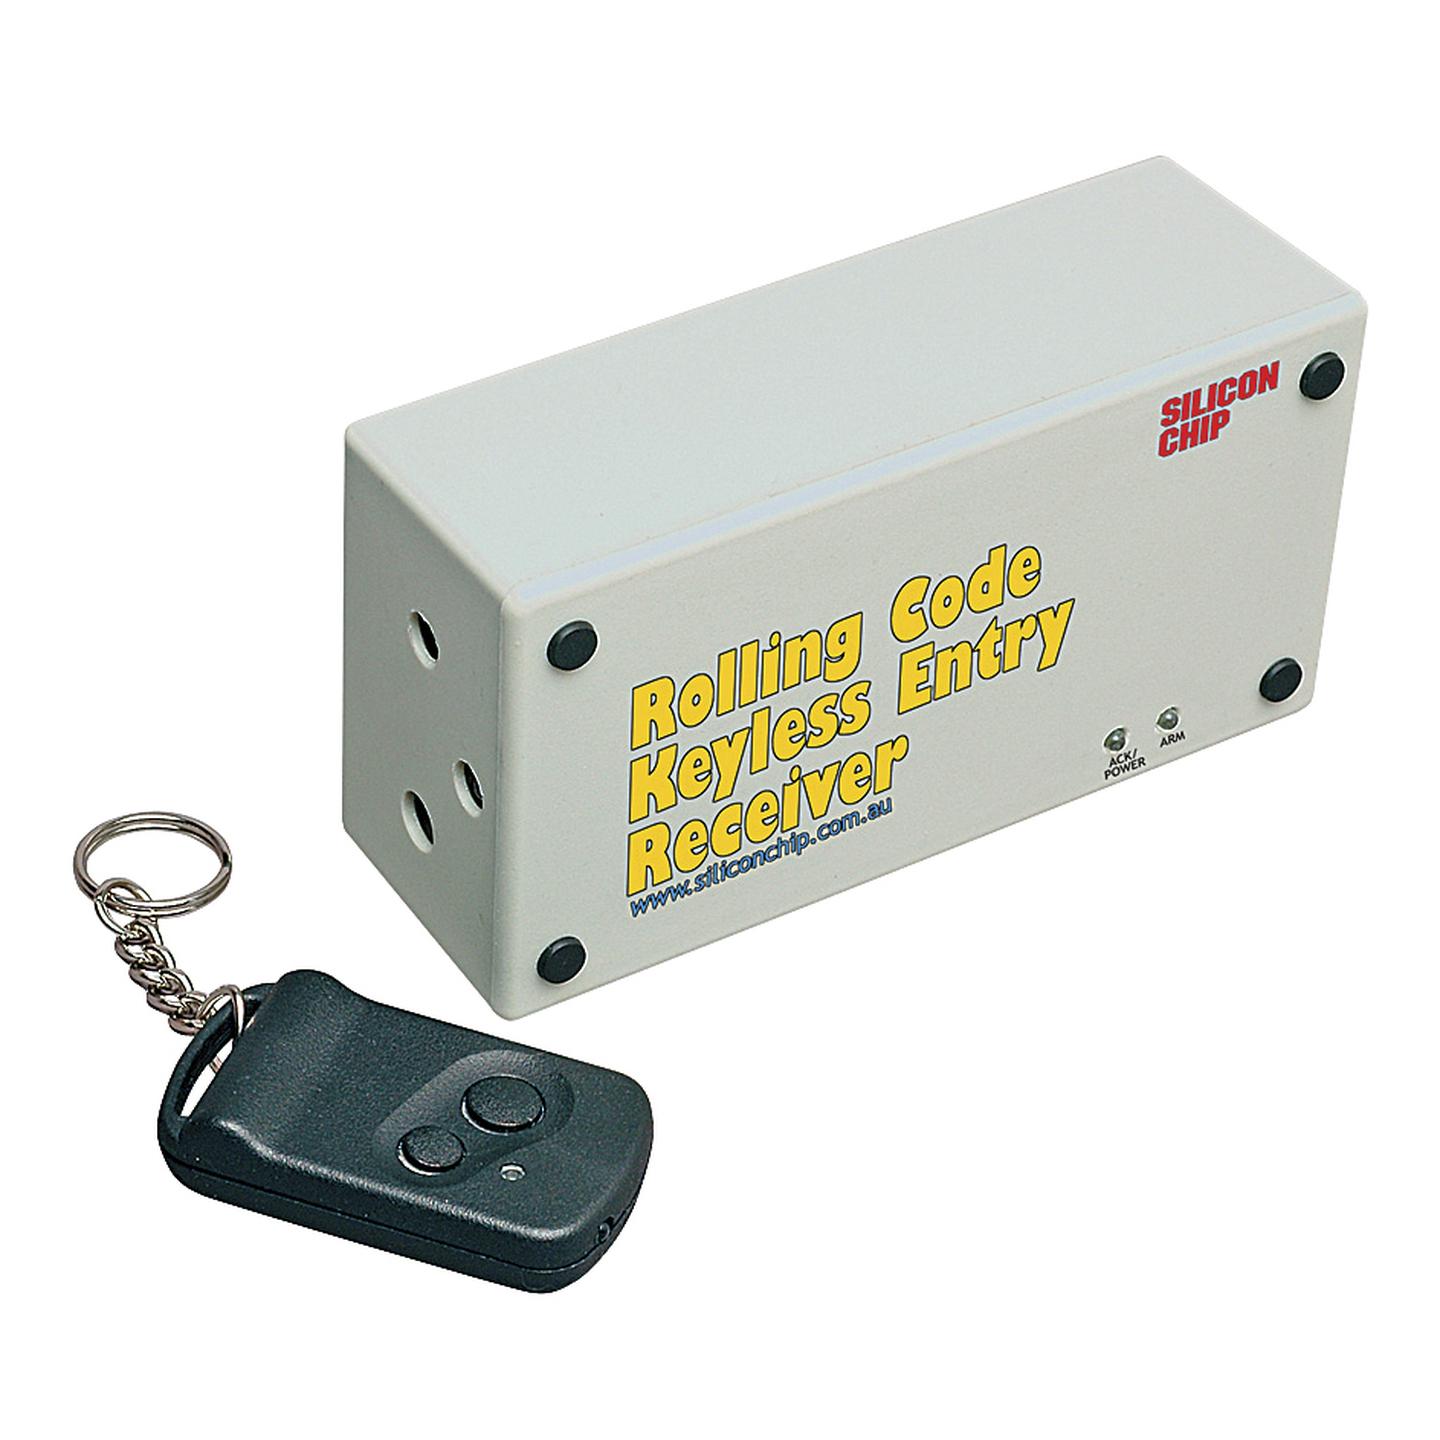 Rolling Code Infrared Keyless Entry System